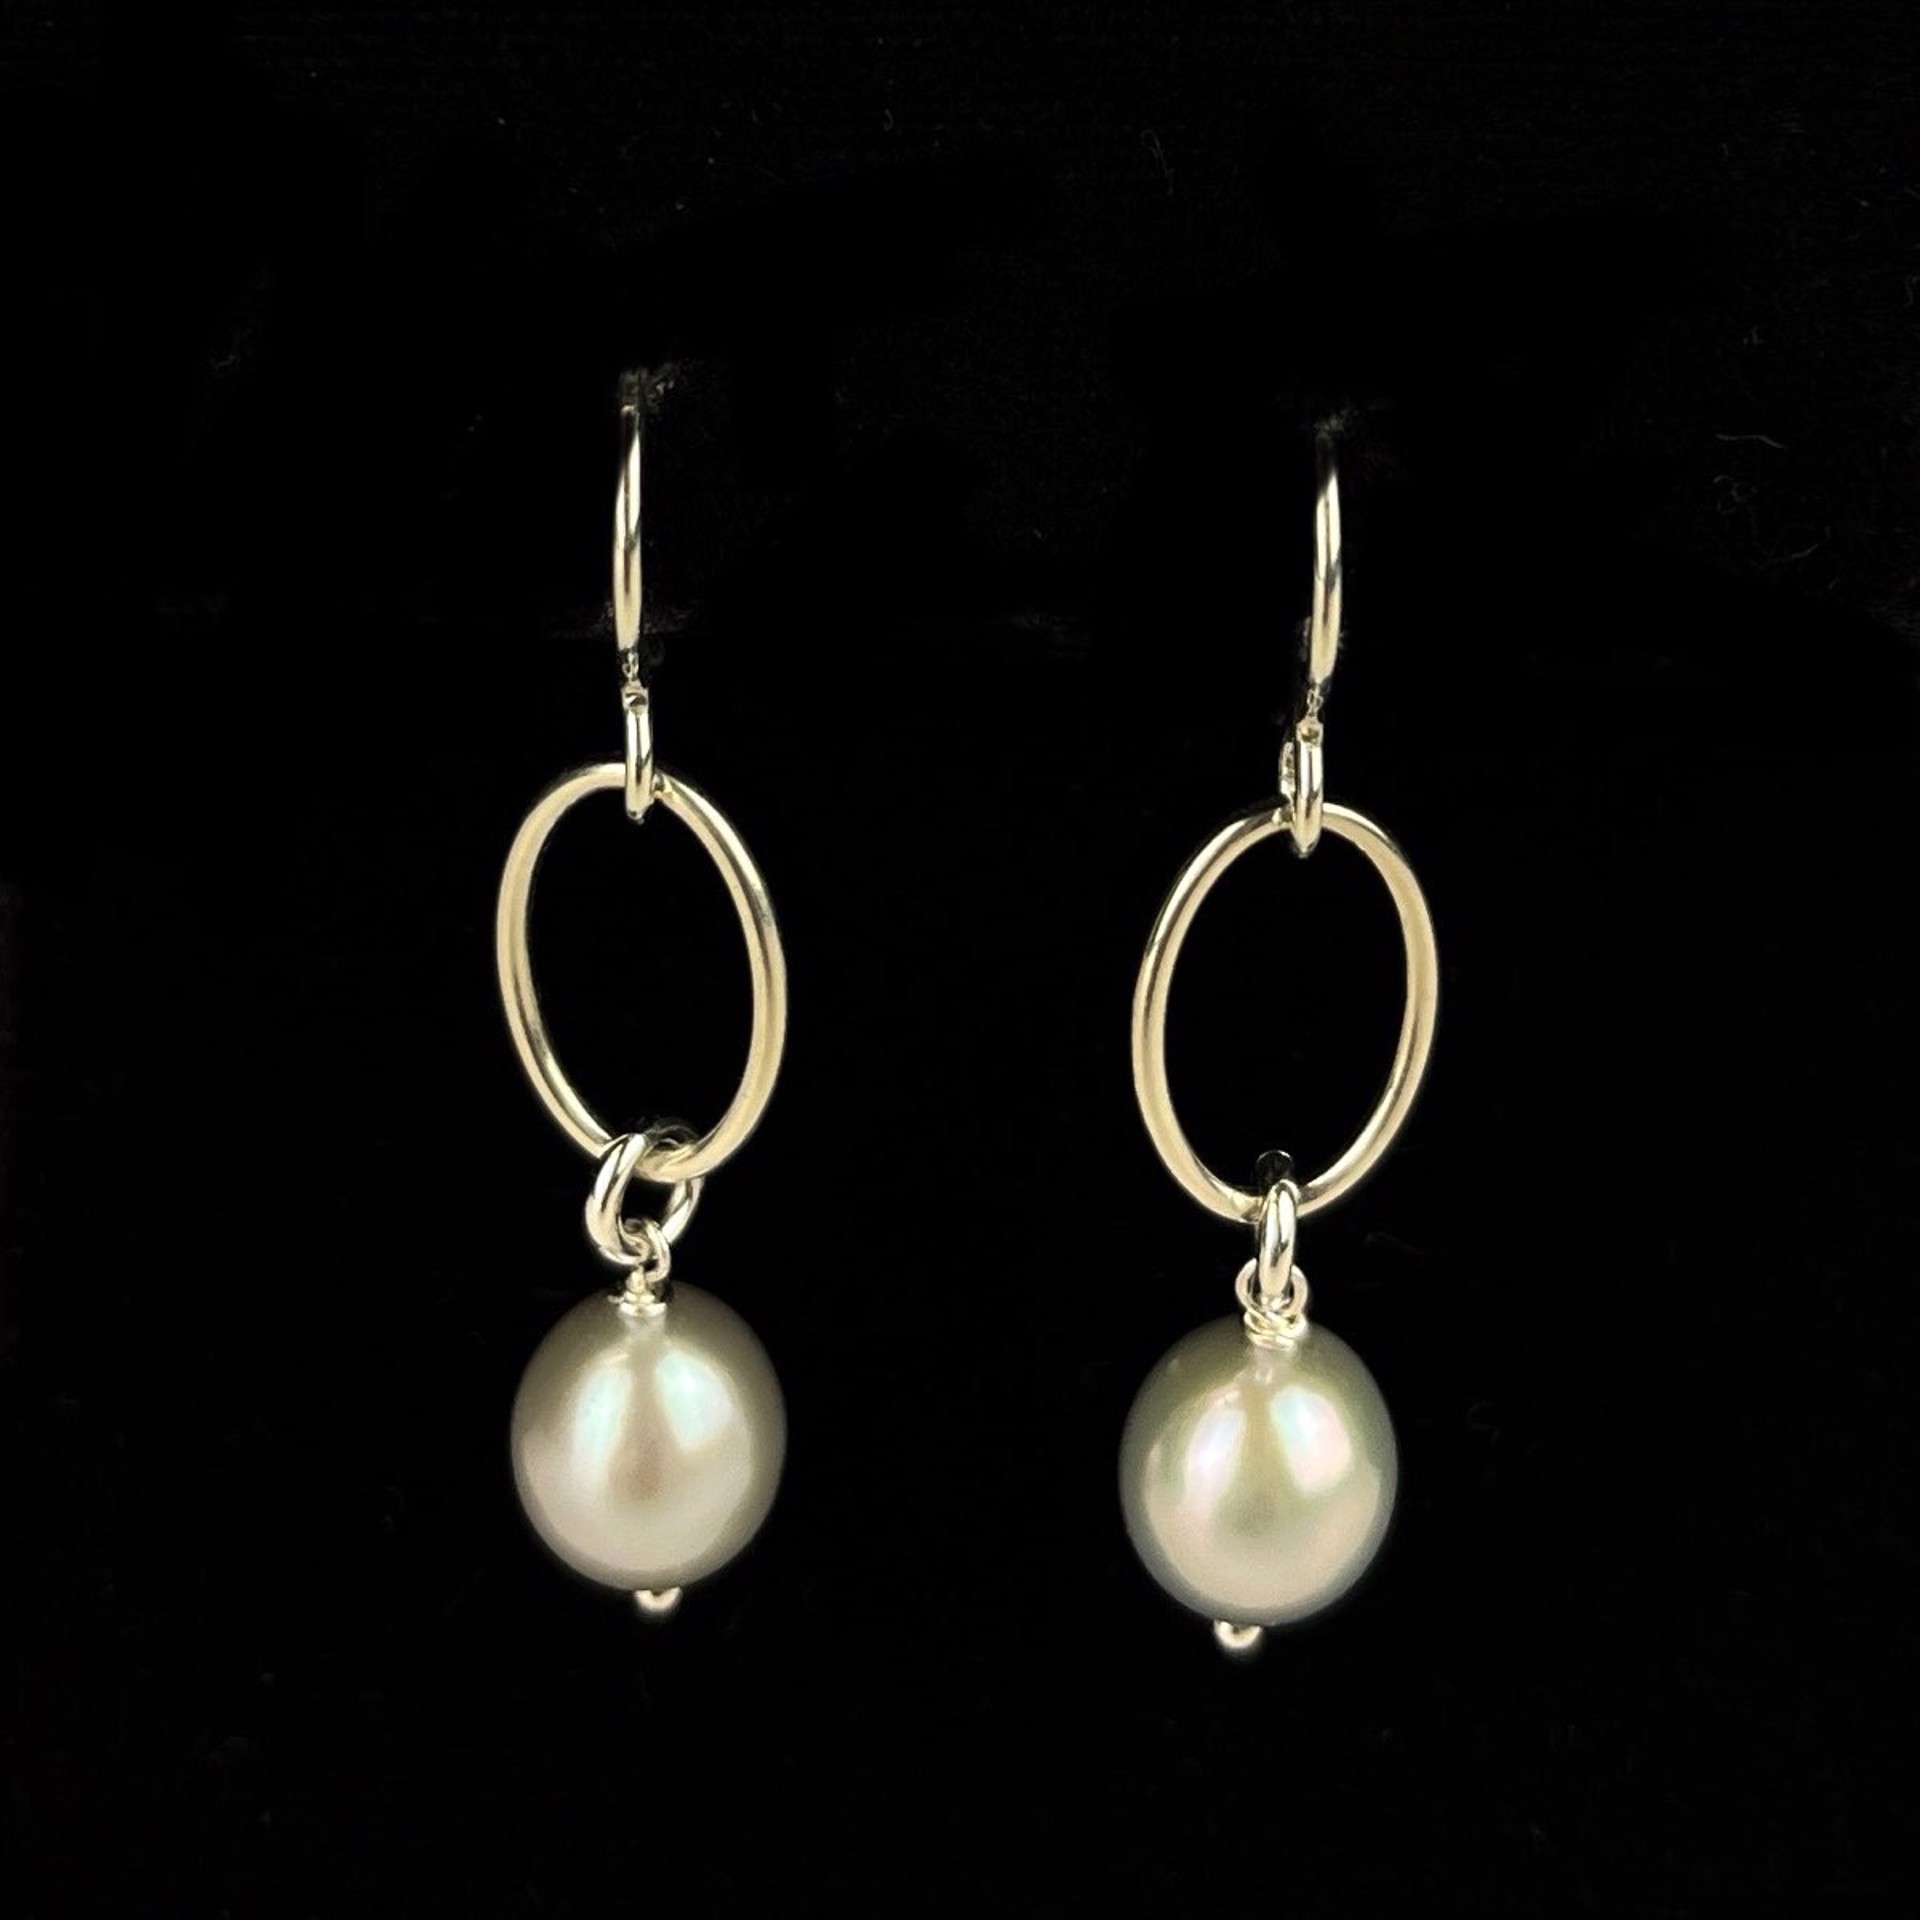 Silver Oval with Pearl Dangle Earrings by Nichole Collins